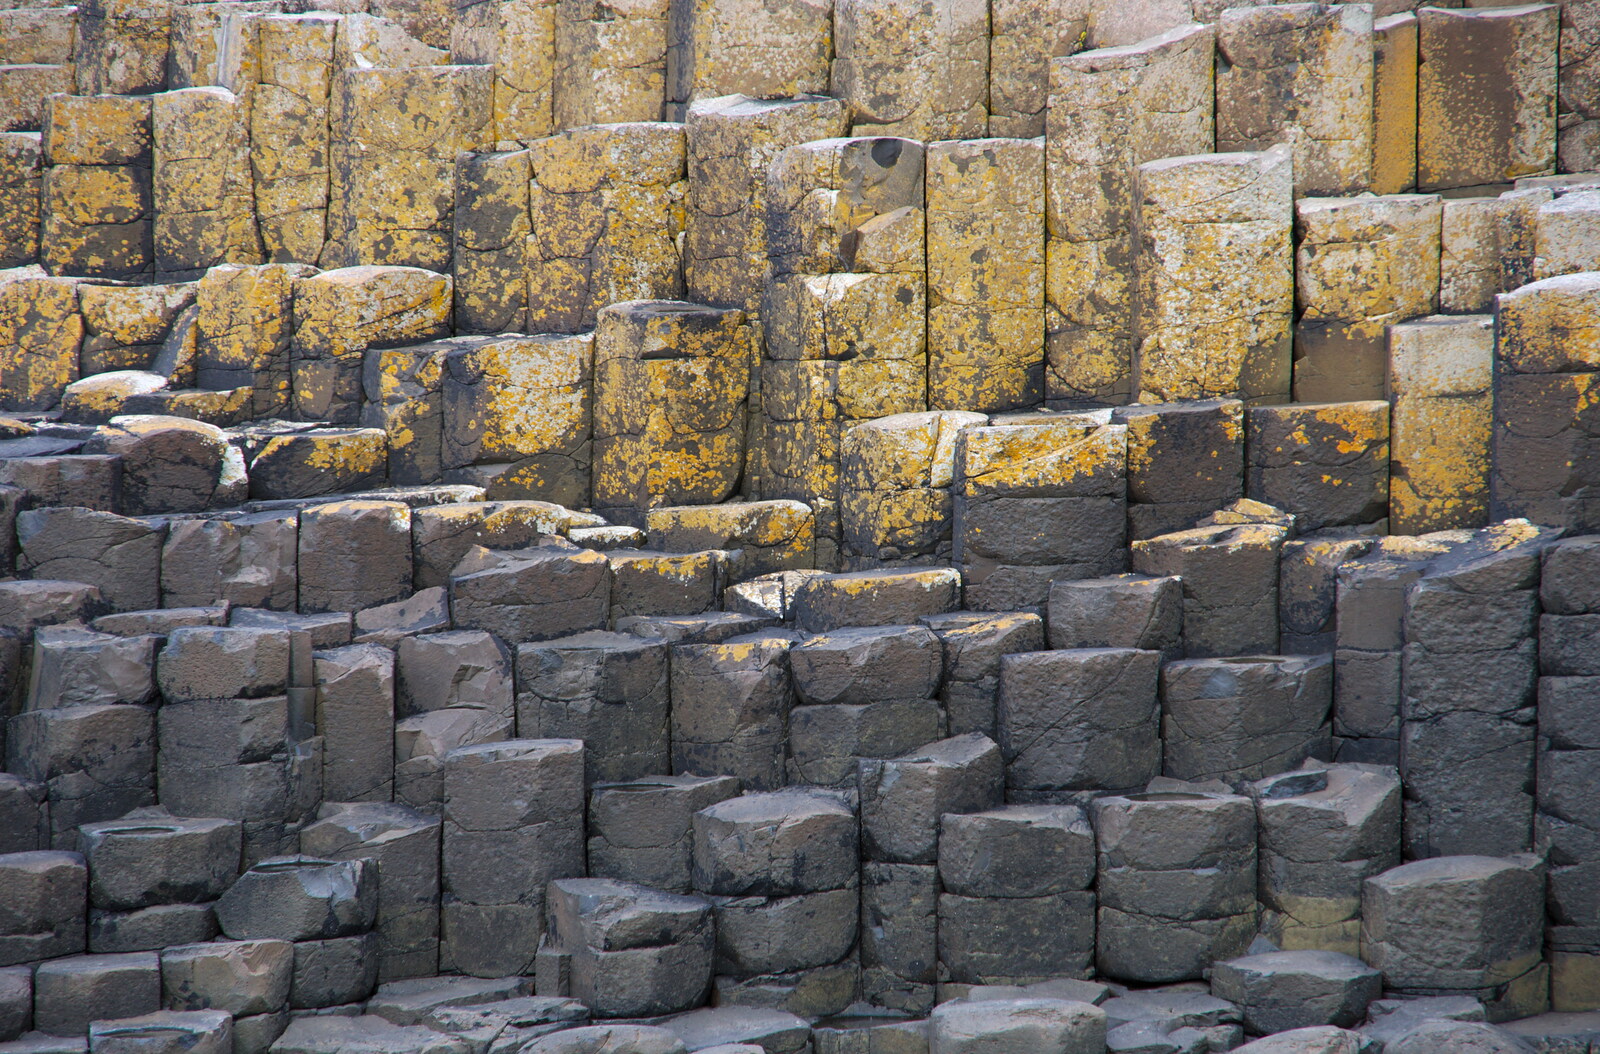 A nice arrangement of vertical hexagons from The Giant's Causeway, Bushmills, County Antrim, Northern Ireland - 14th August 2019